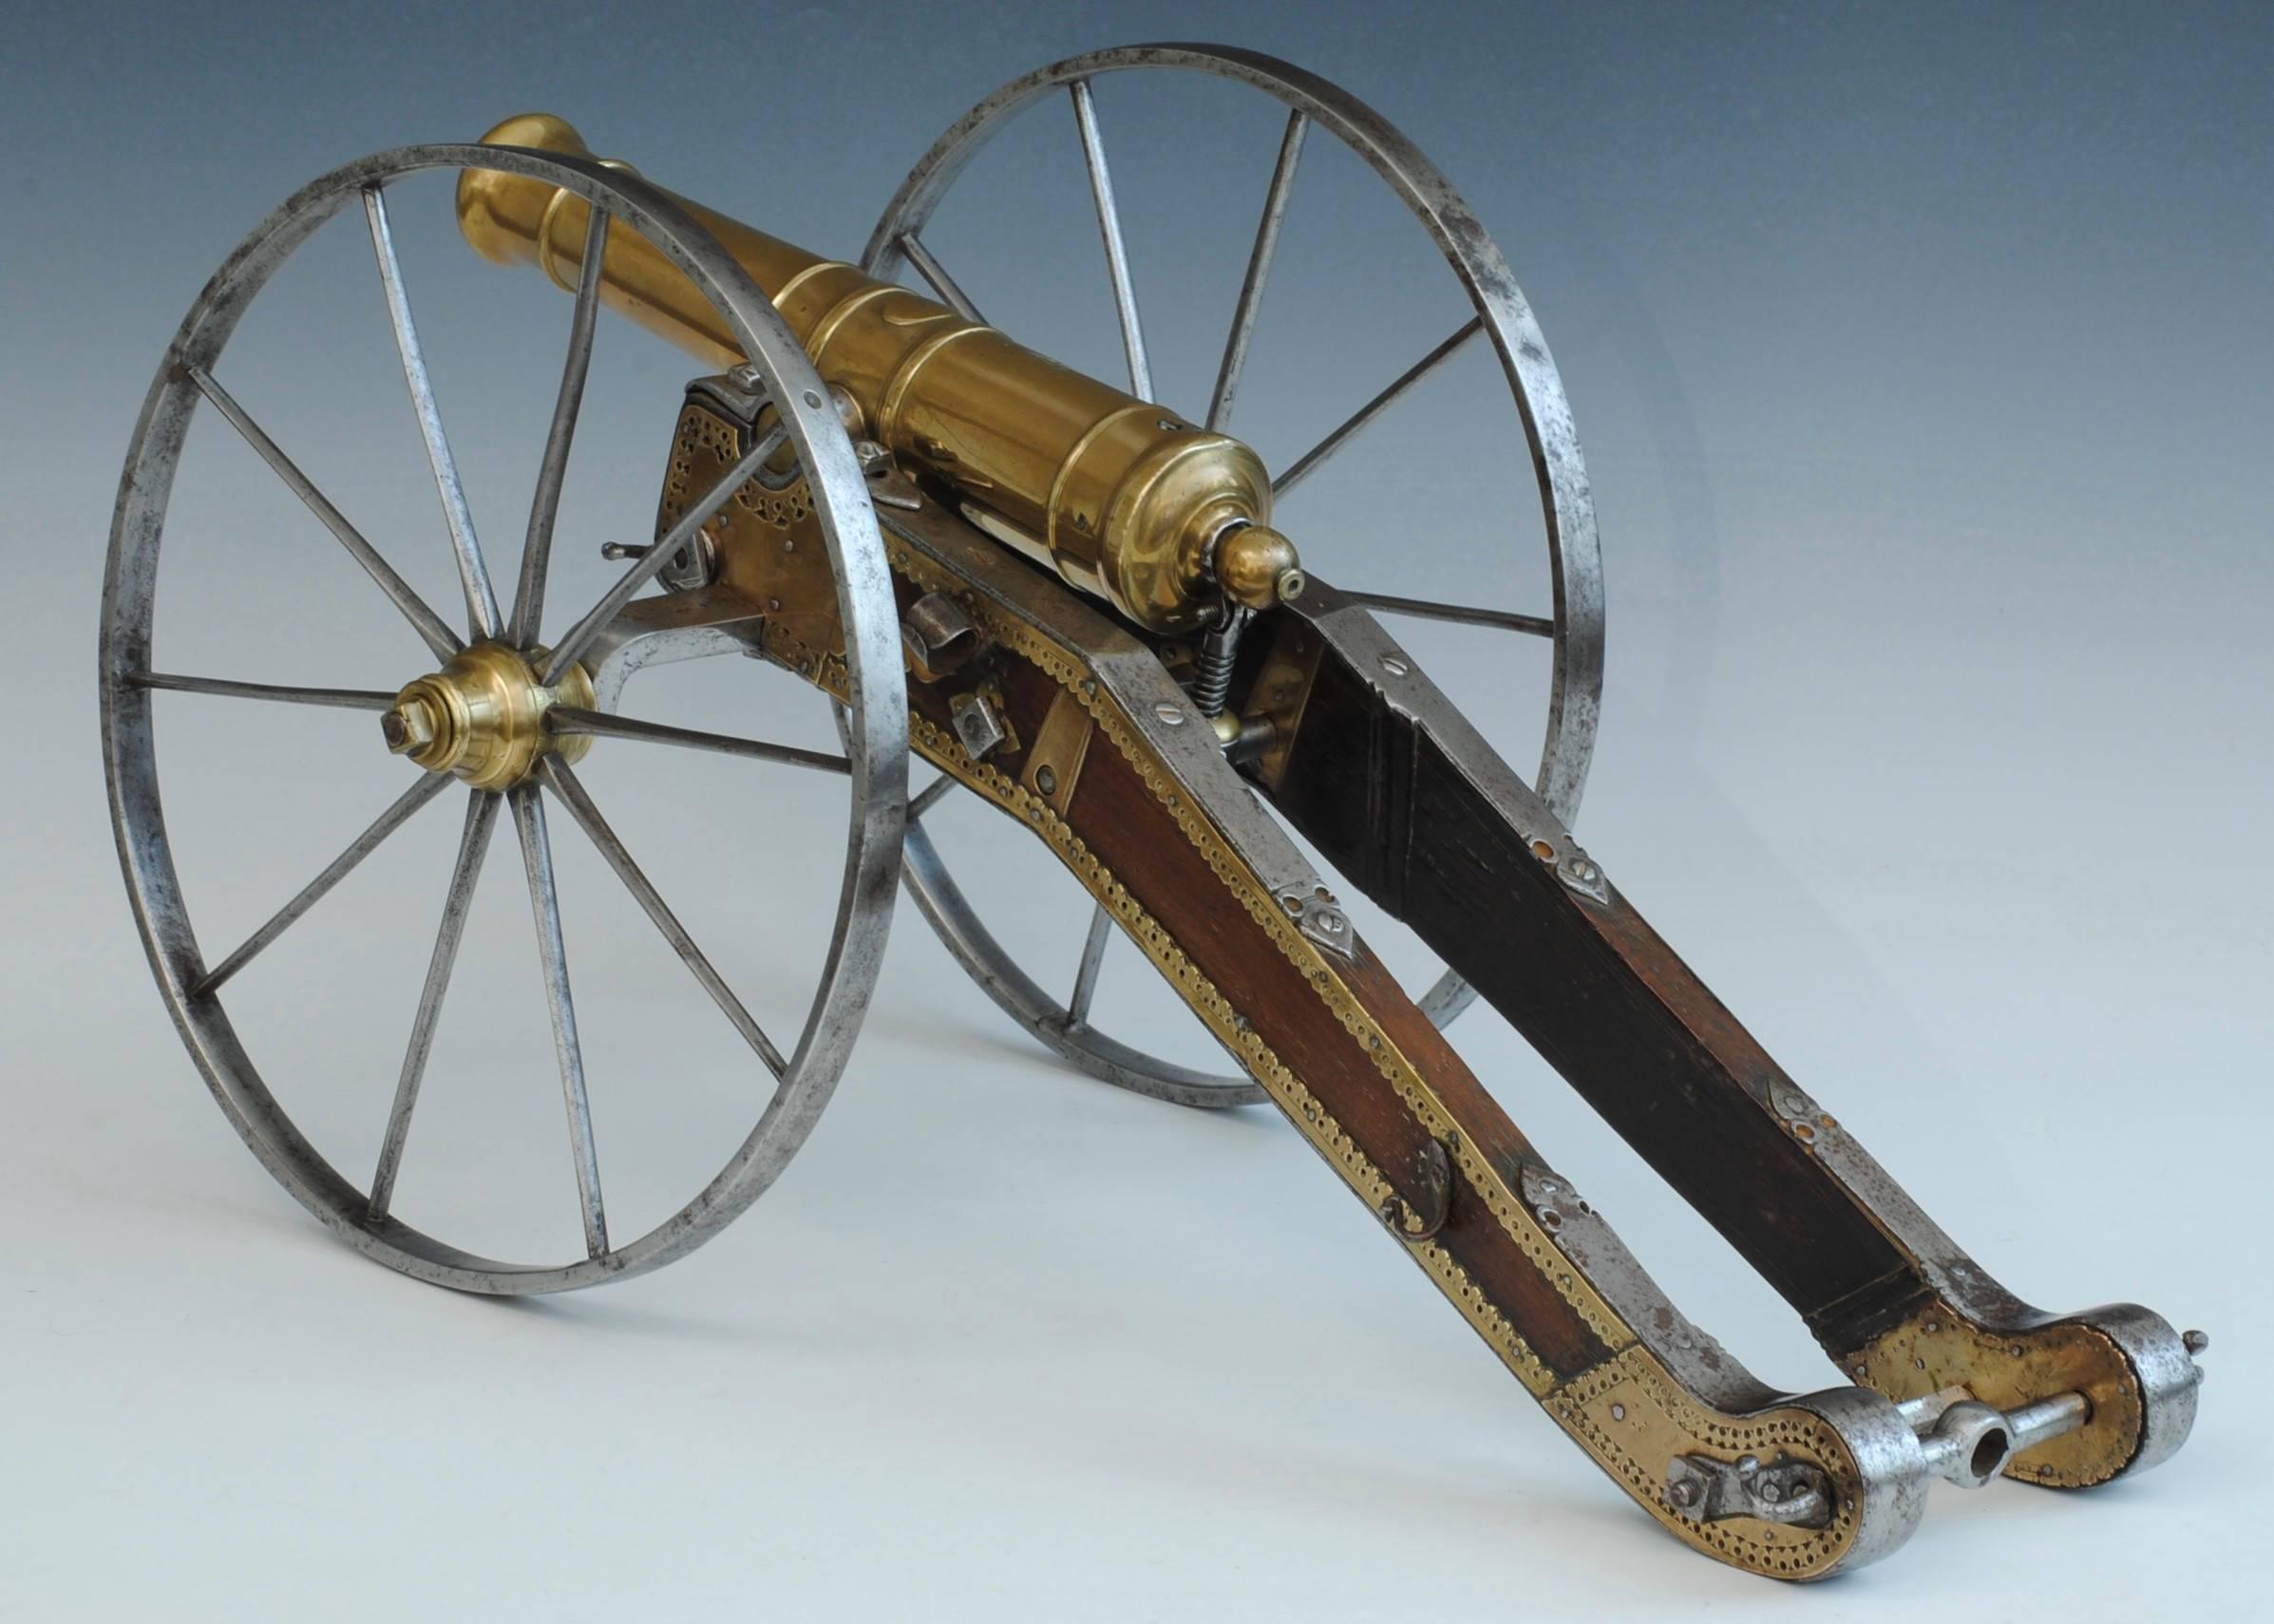 A fine brass barrelled cannon on a steel, brass and wood carriage, the barrel of four stage design.